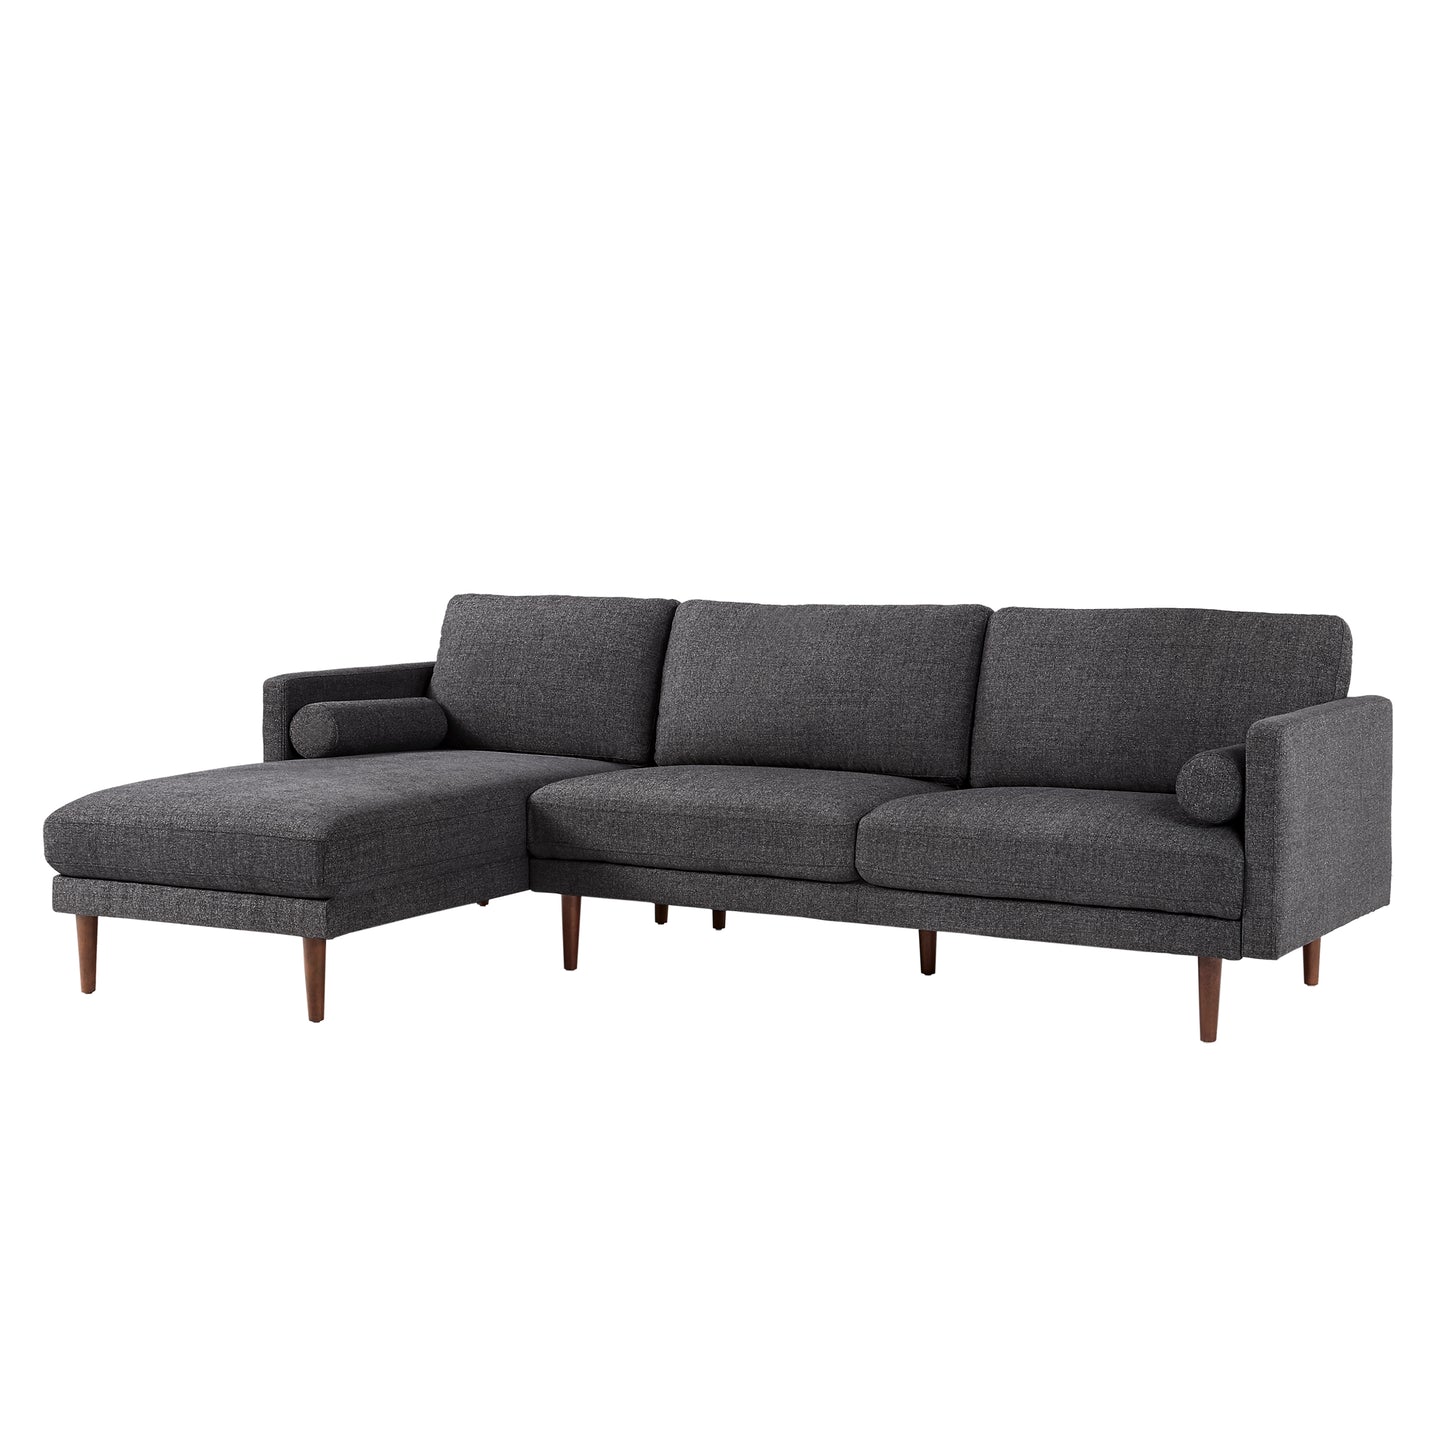 Mid-Century Upholstered Sectional Sofa - Black, 3-Seat Sectional with Left-Facing Chaise